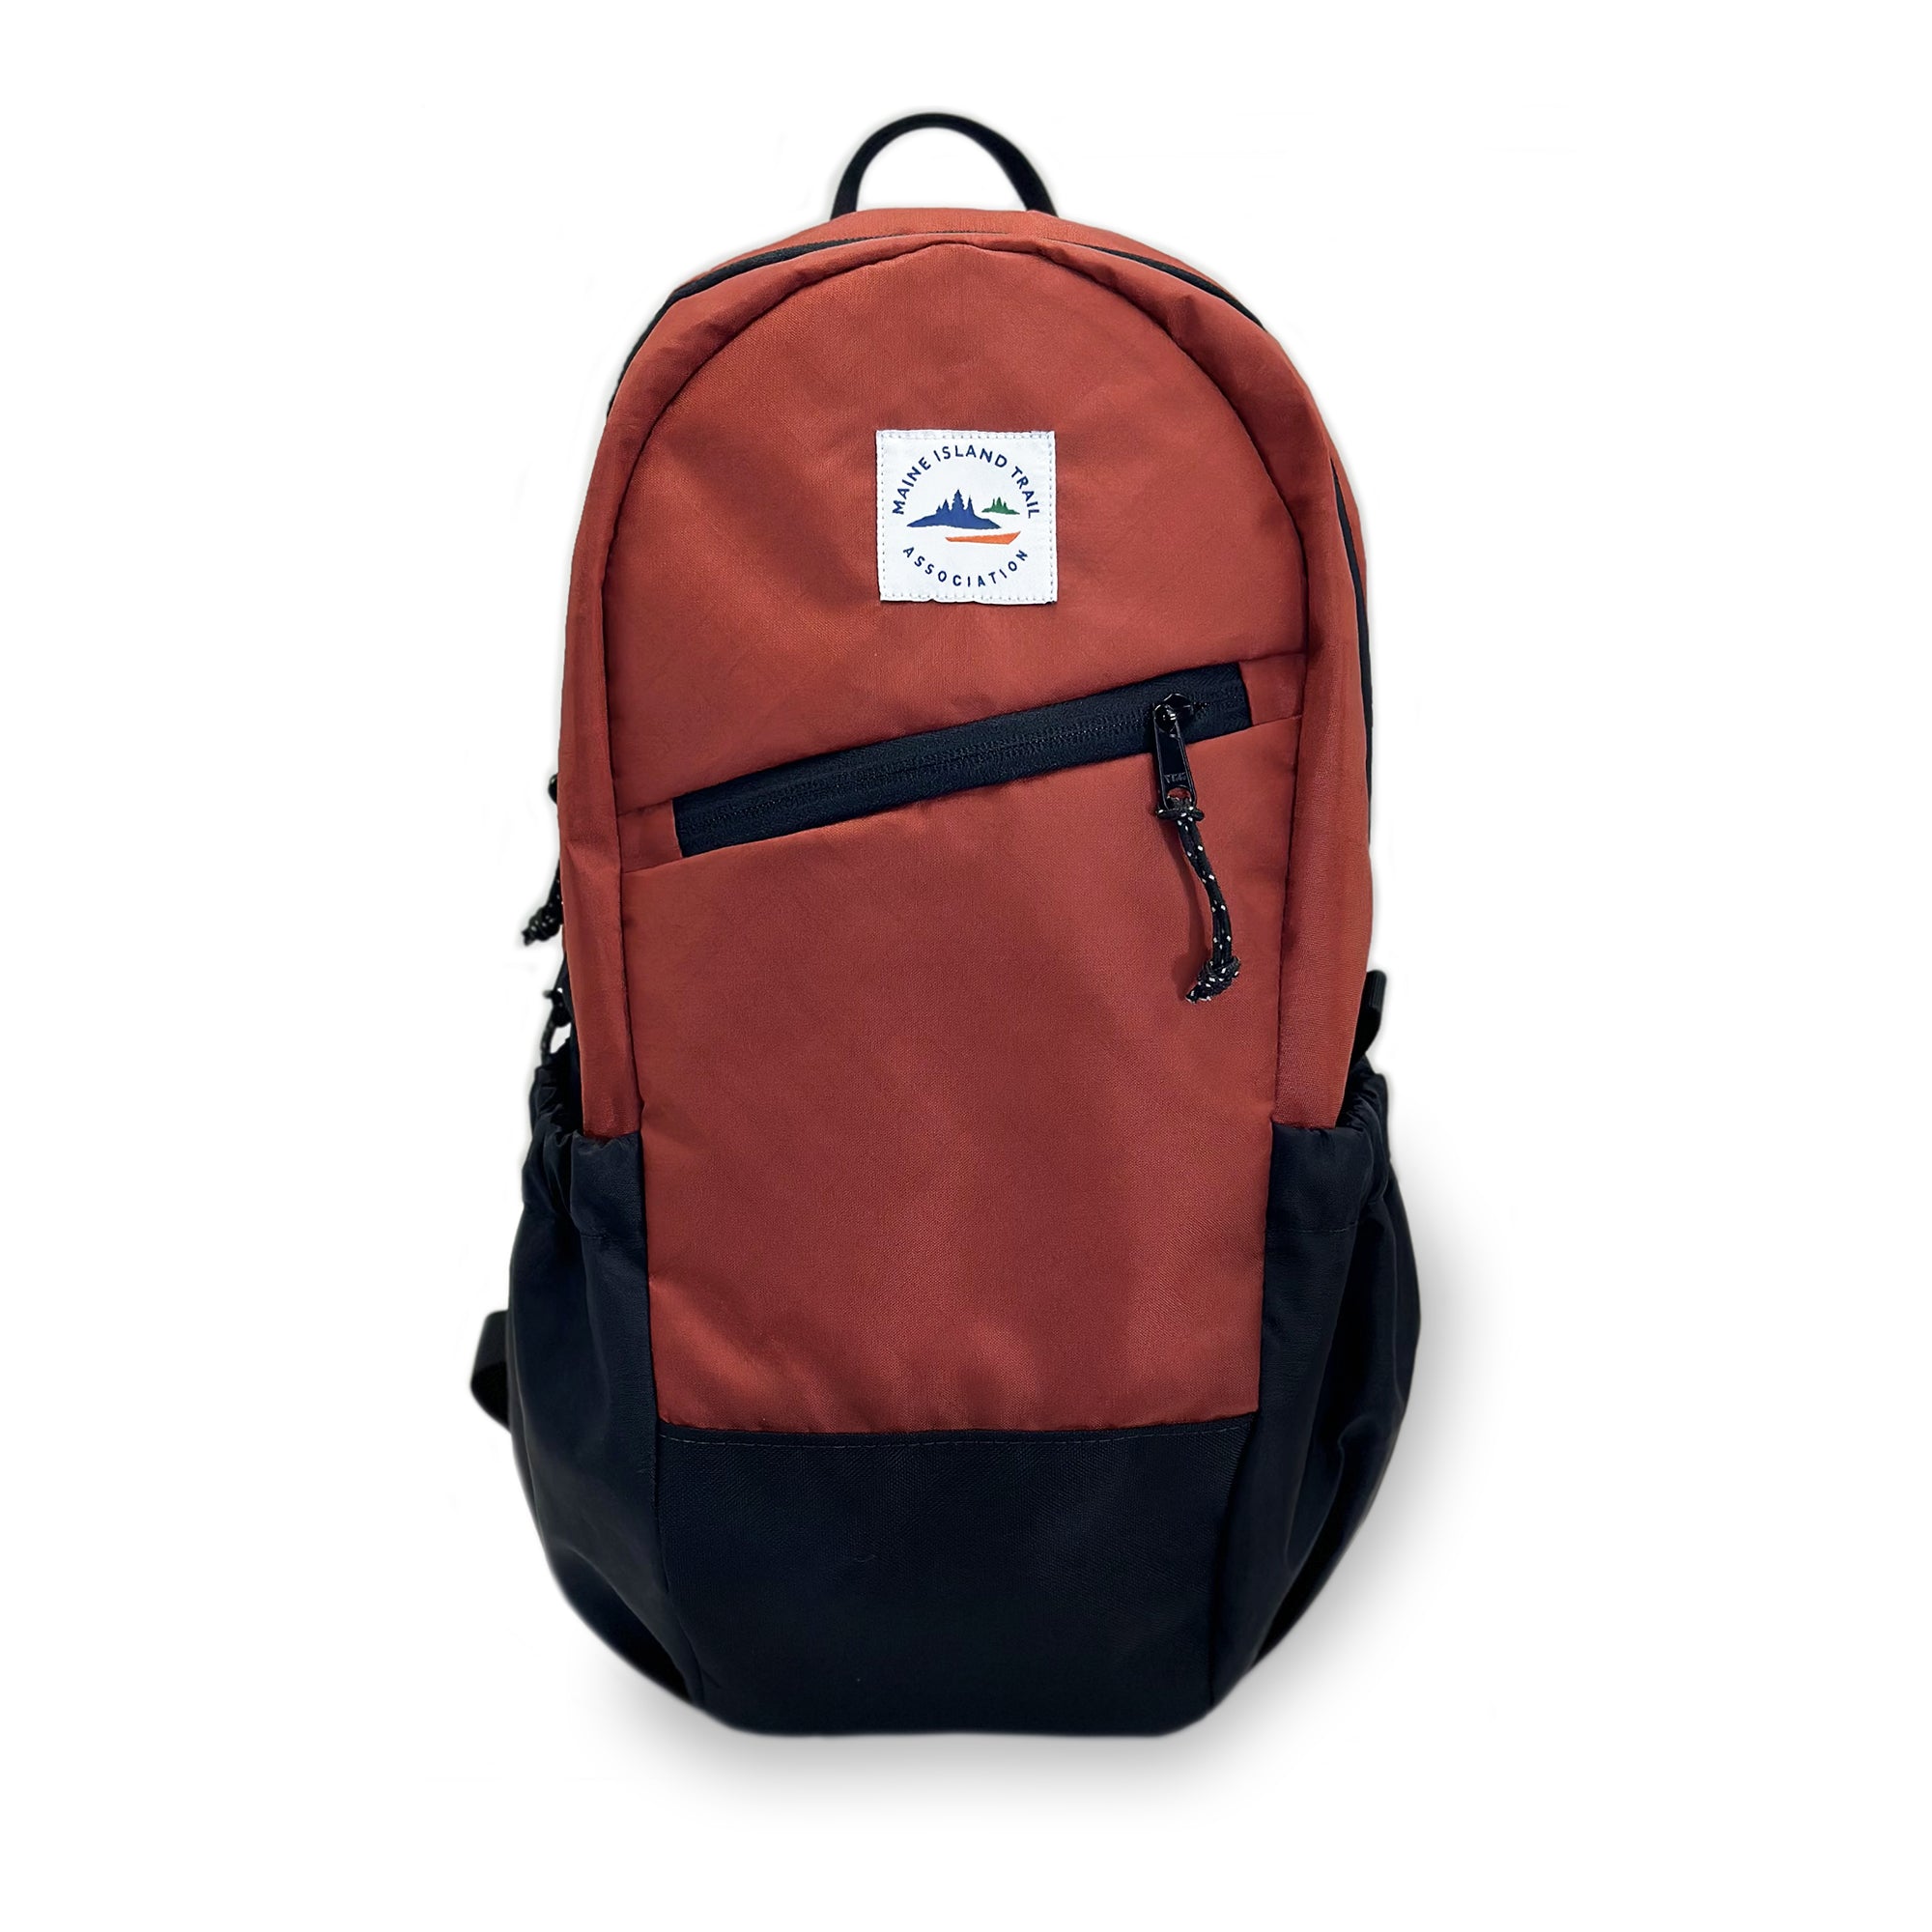 18L MITA x Flowfold Backpack - Recycled Navy, durable and weather-resistant backpack